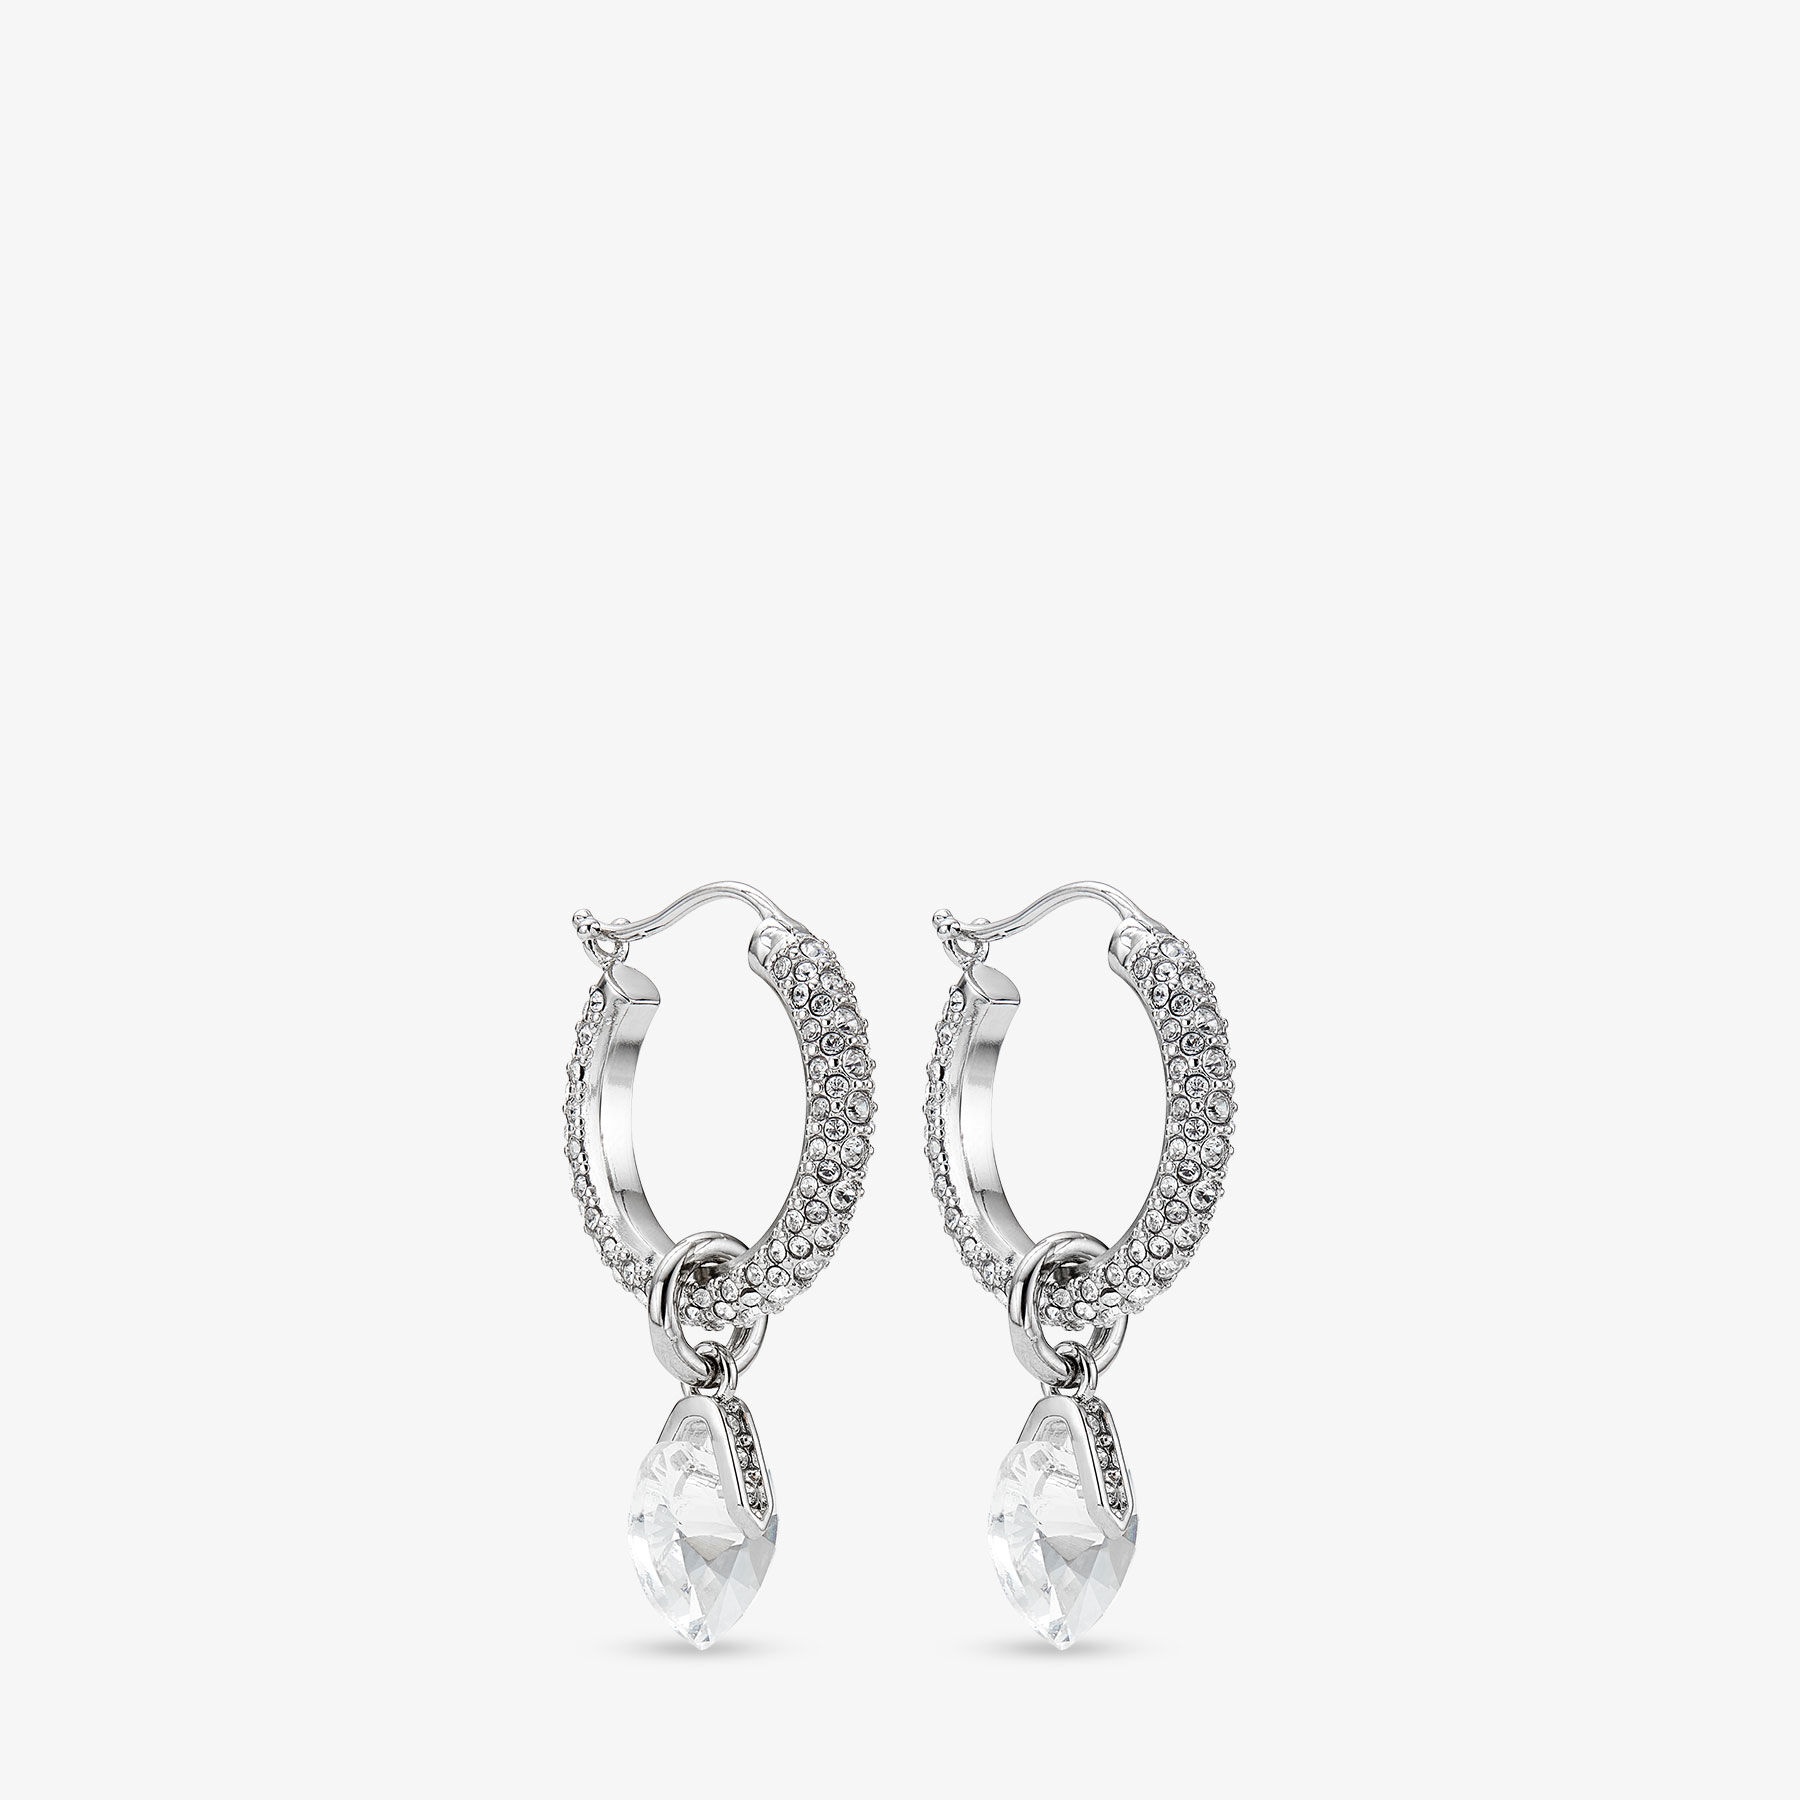 Heart Hoops
Silver-Finish Heart Hoop Earrings with Crystals - 3